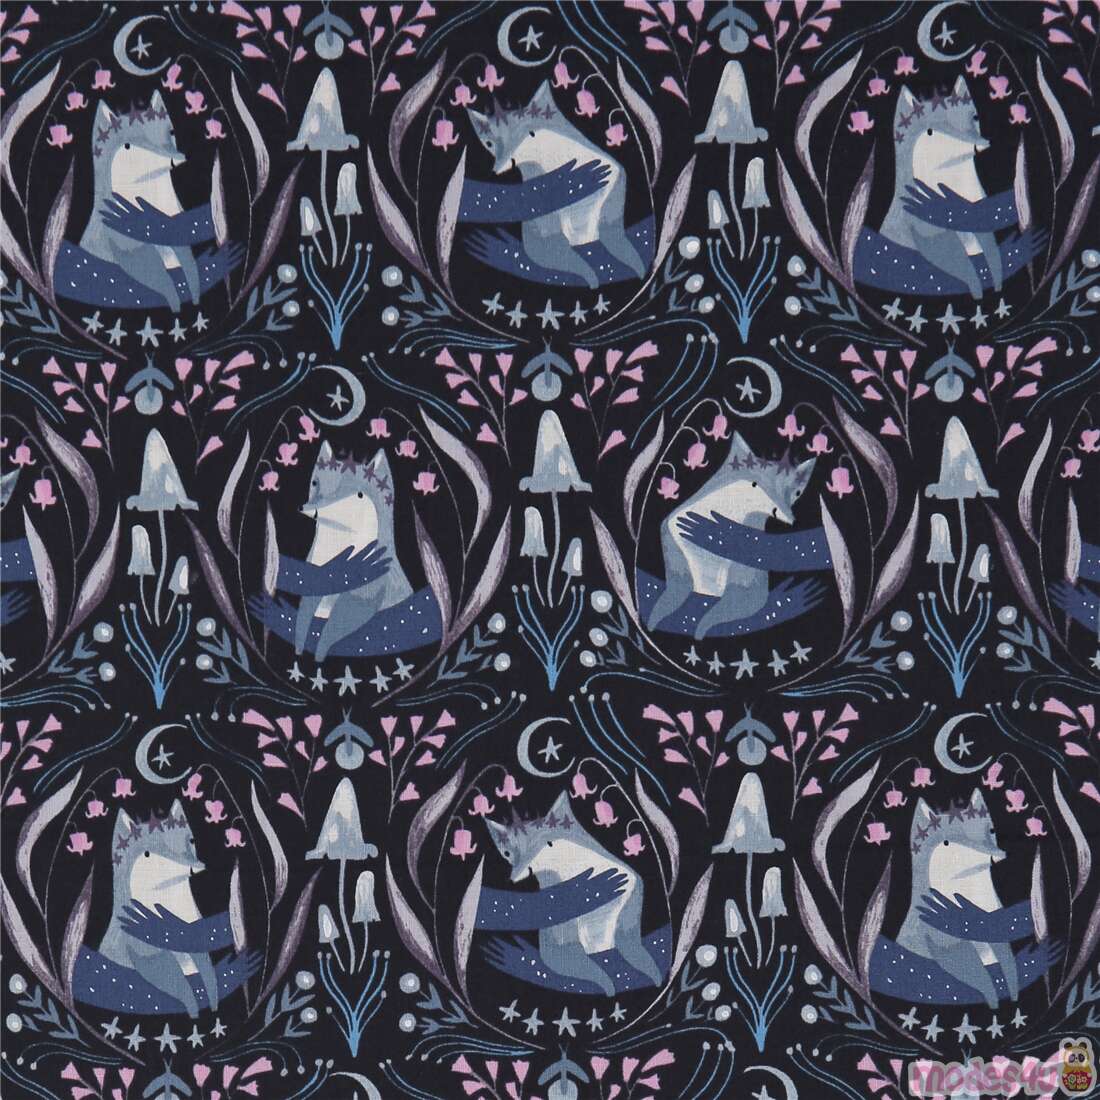 Fox Pink' Fabric by the Yard (Hot Pink)